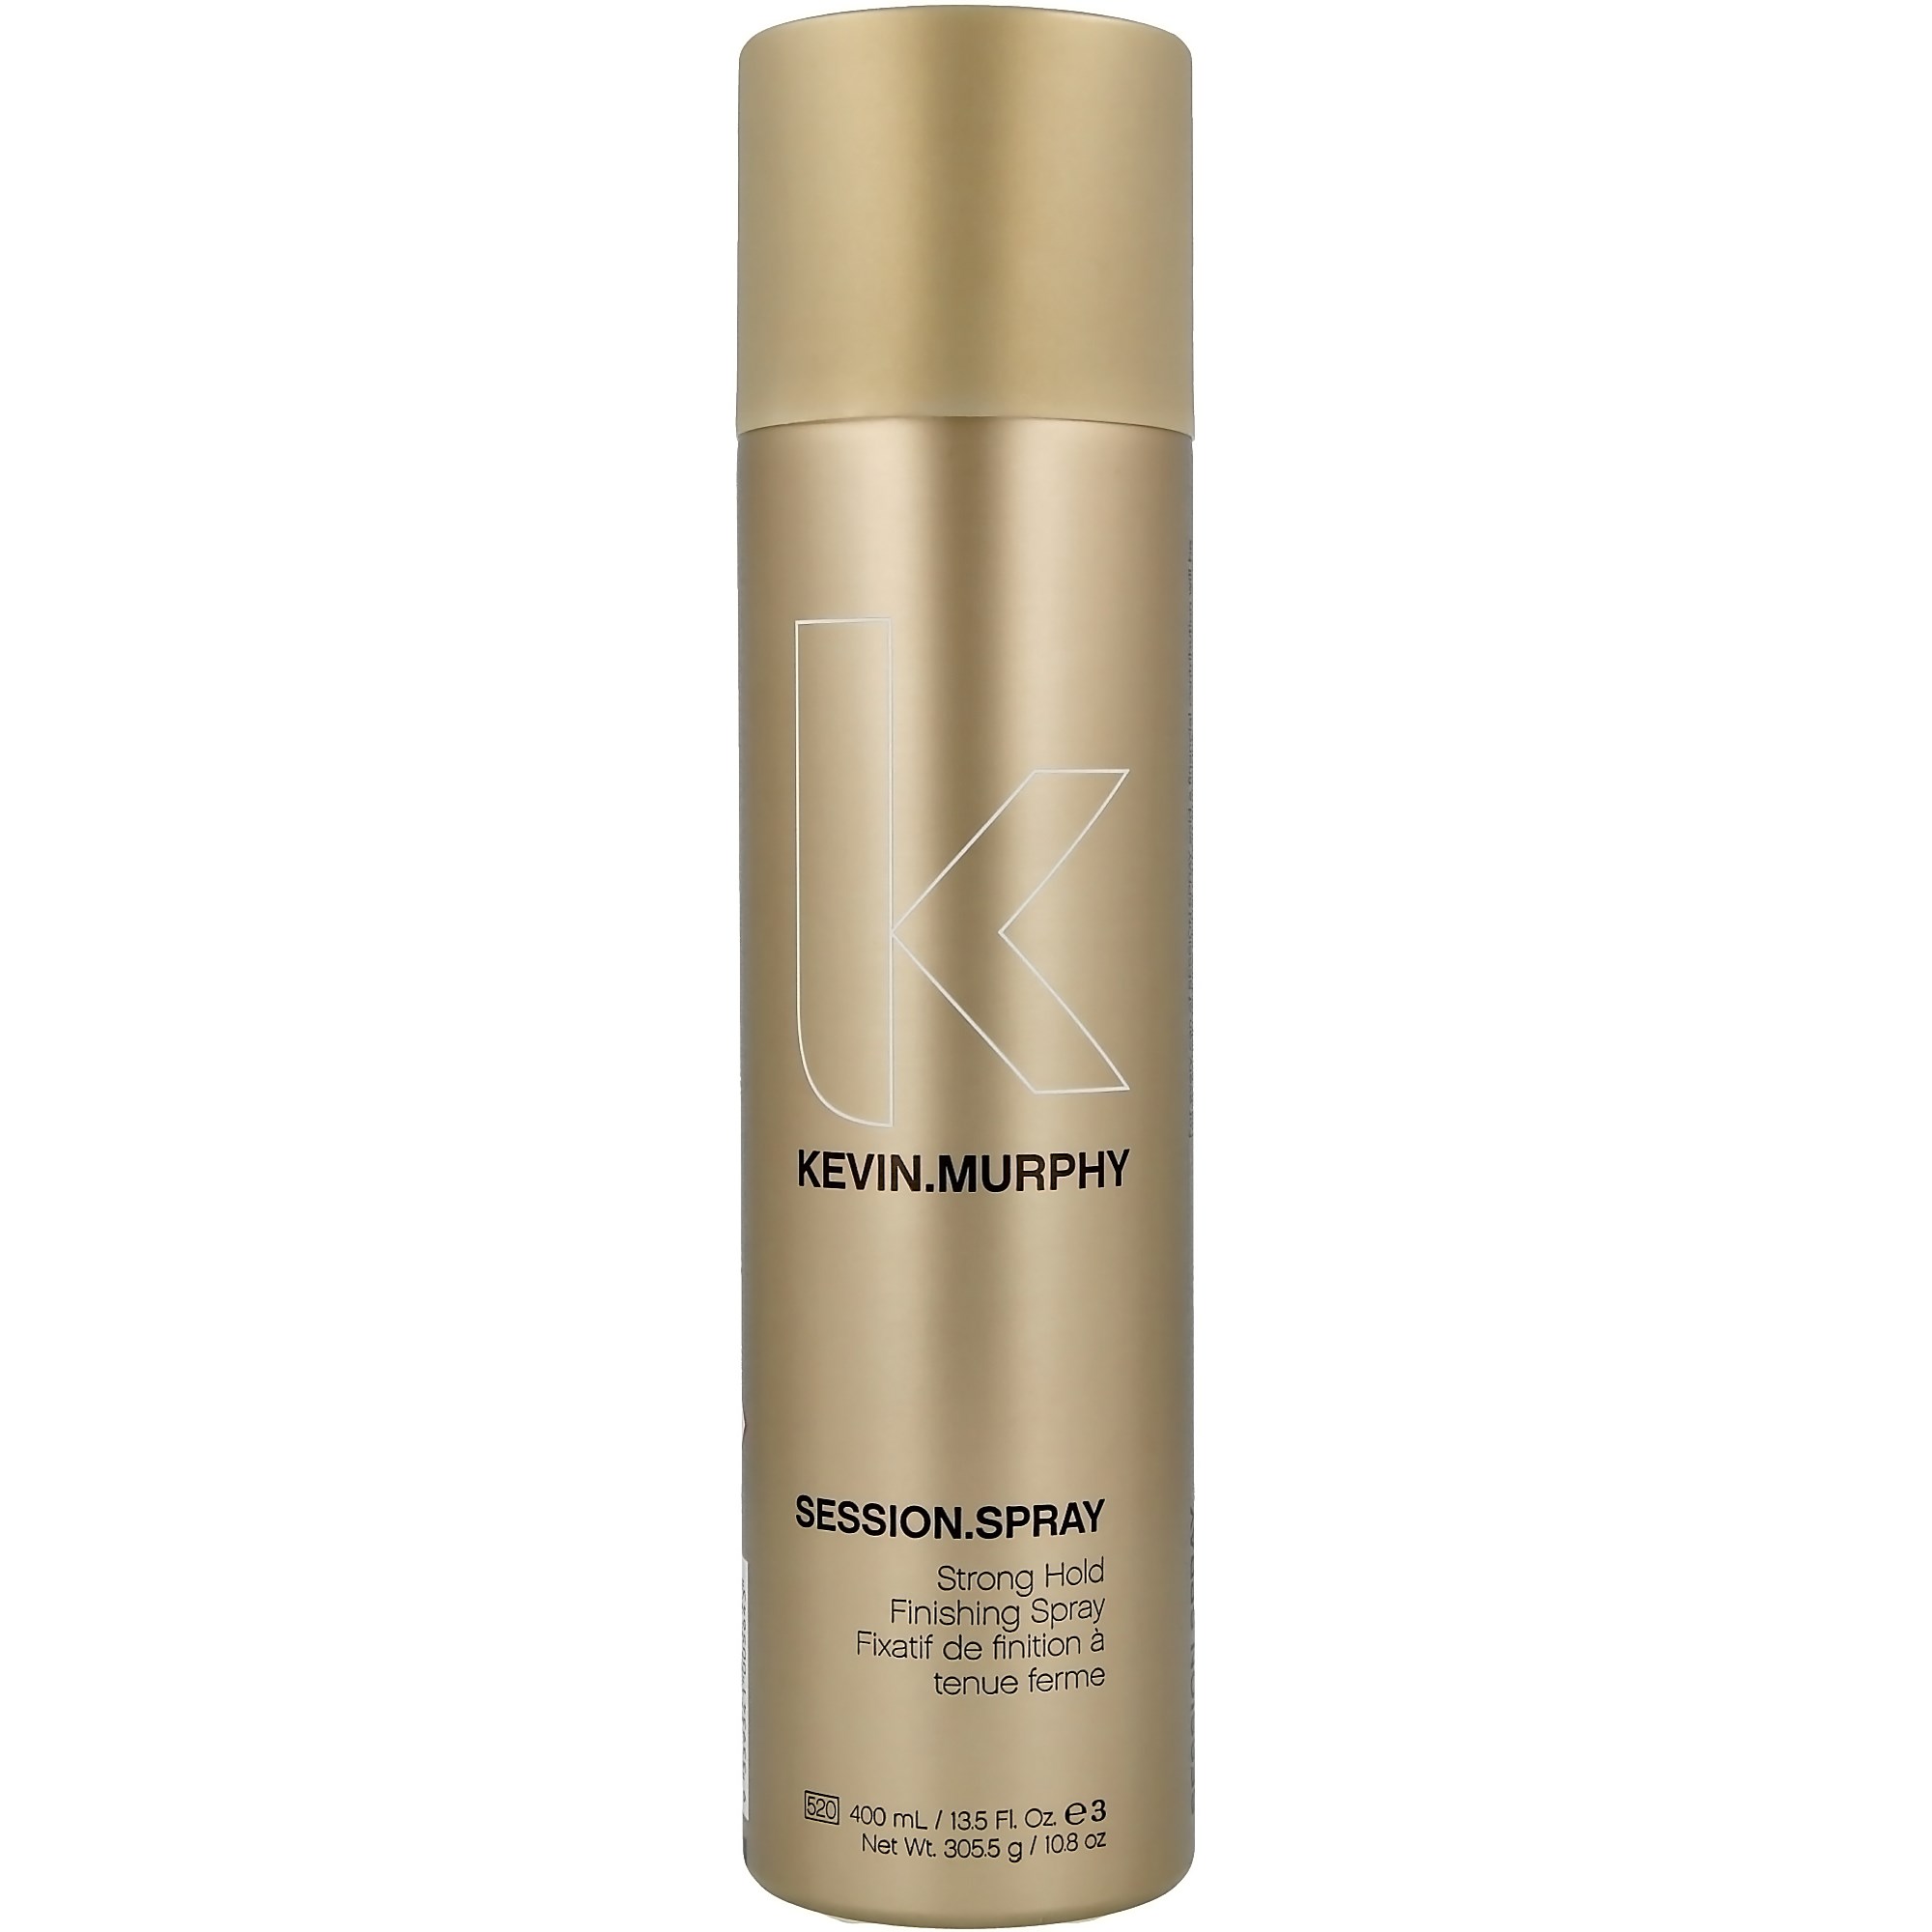 Kevin Murphy Session Spray, 400ml